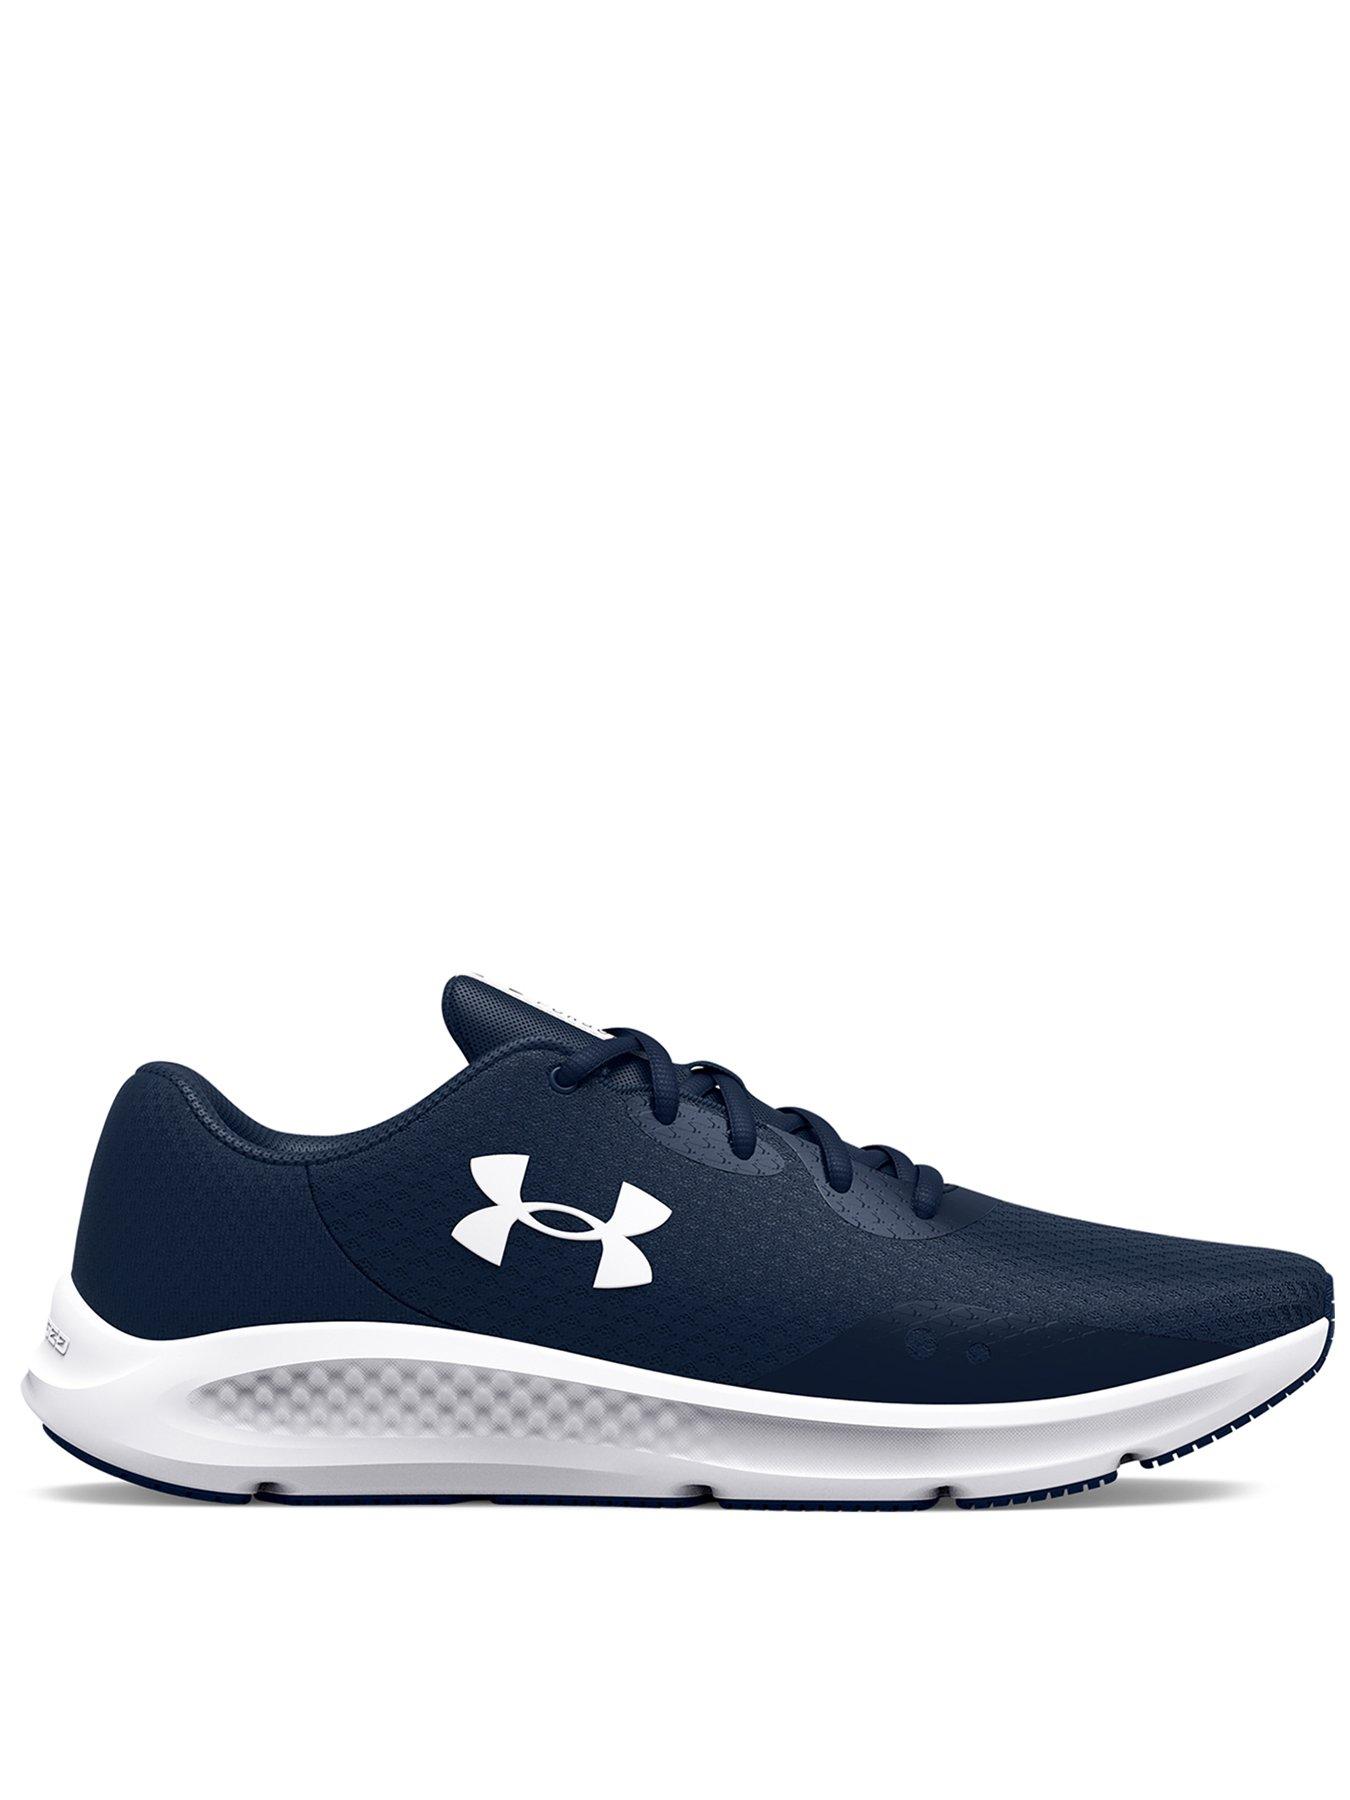 Under Armour Assert 9 Red / White / Black  Tony Pappas - Tony Pappas -  Footwear store